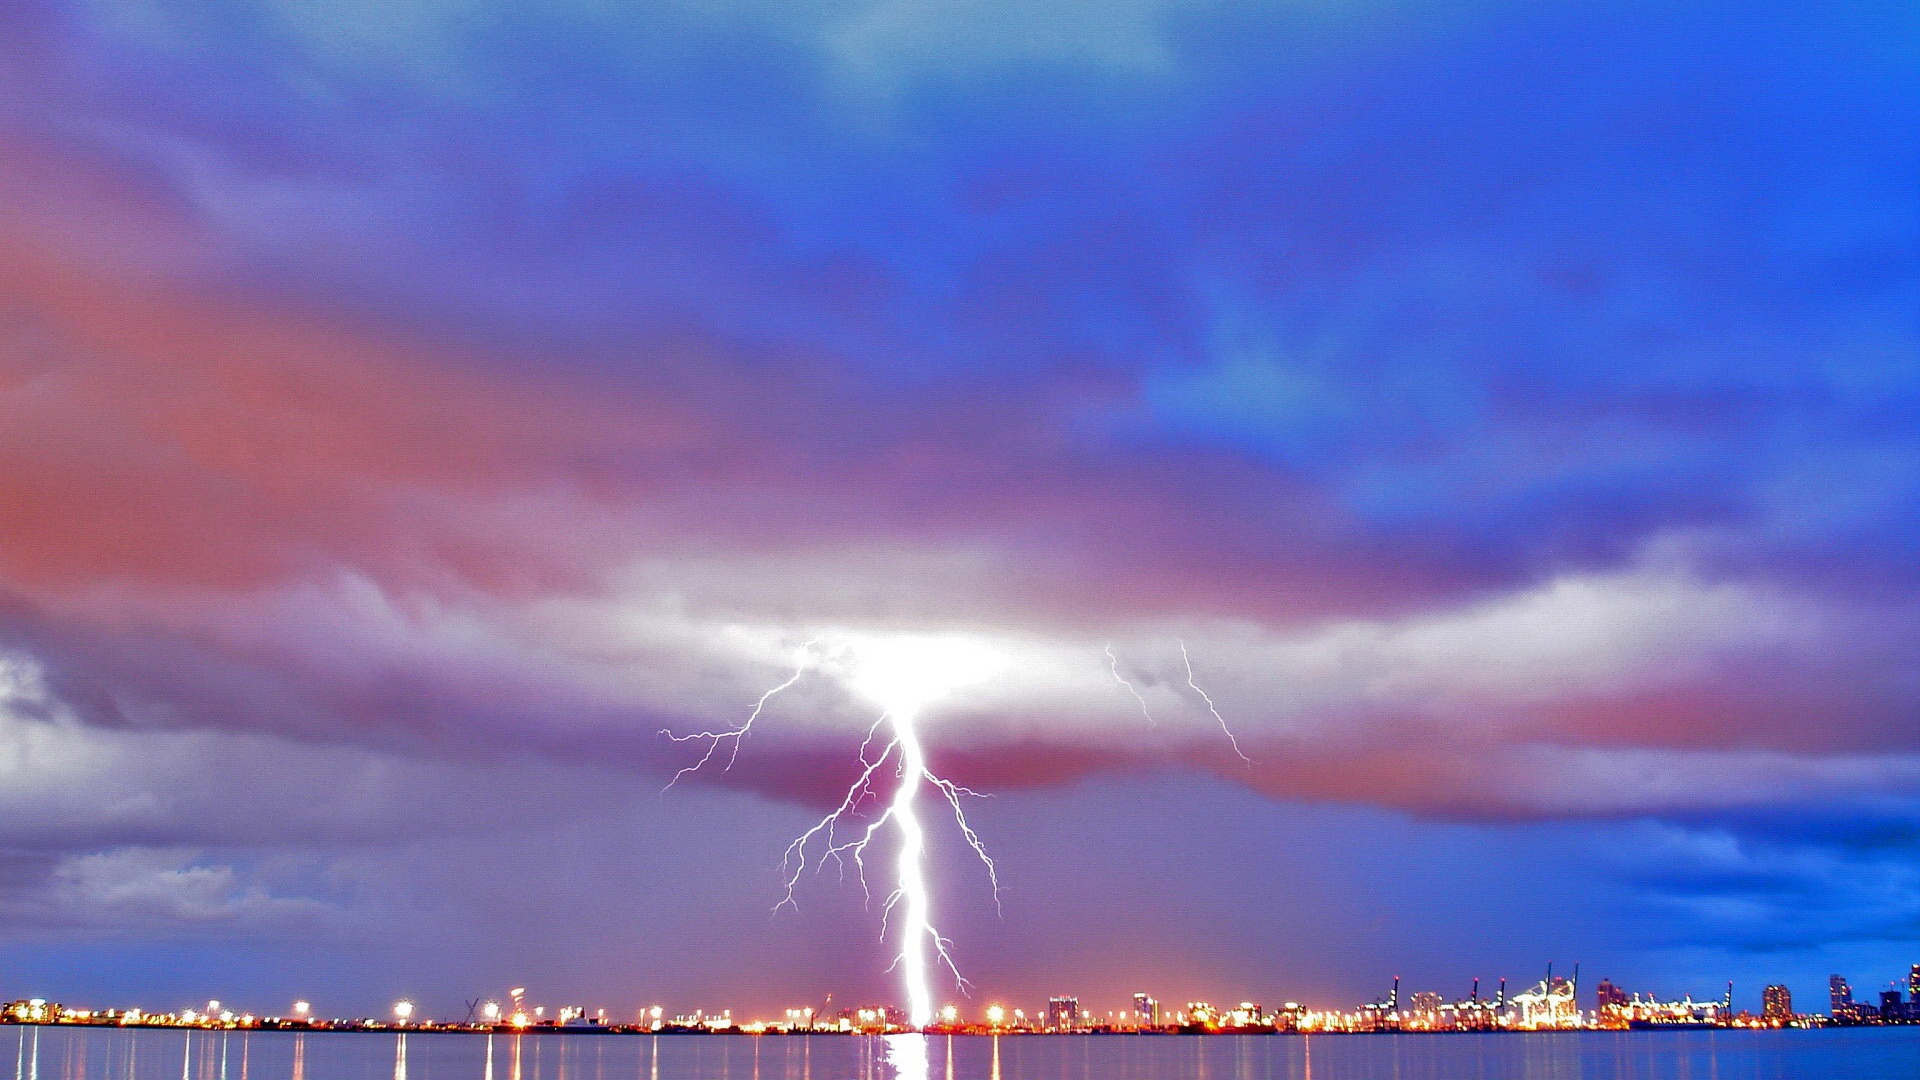 high definition wallpapers,sky,nature,cloud,lightning,daytime